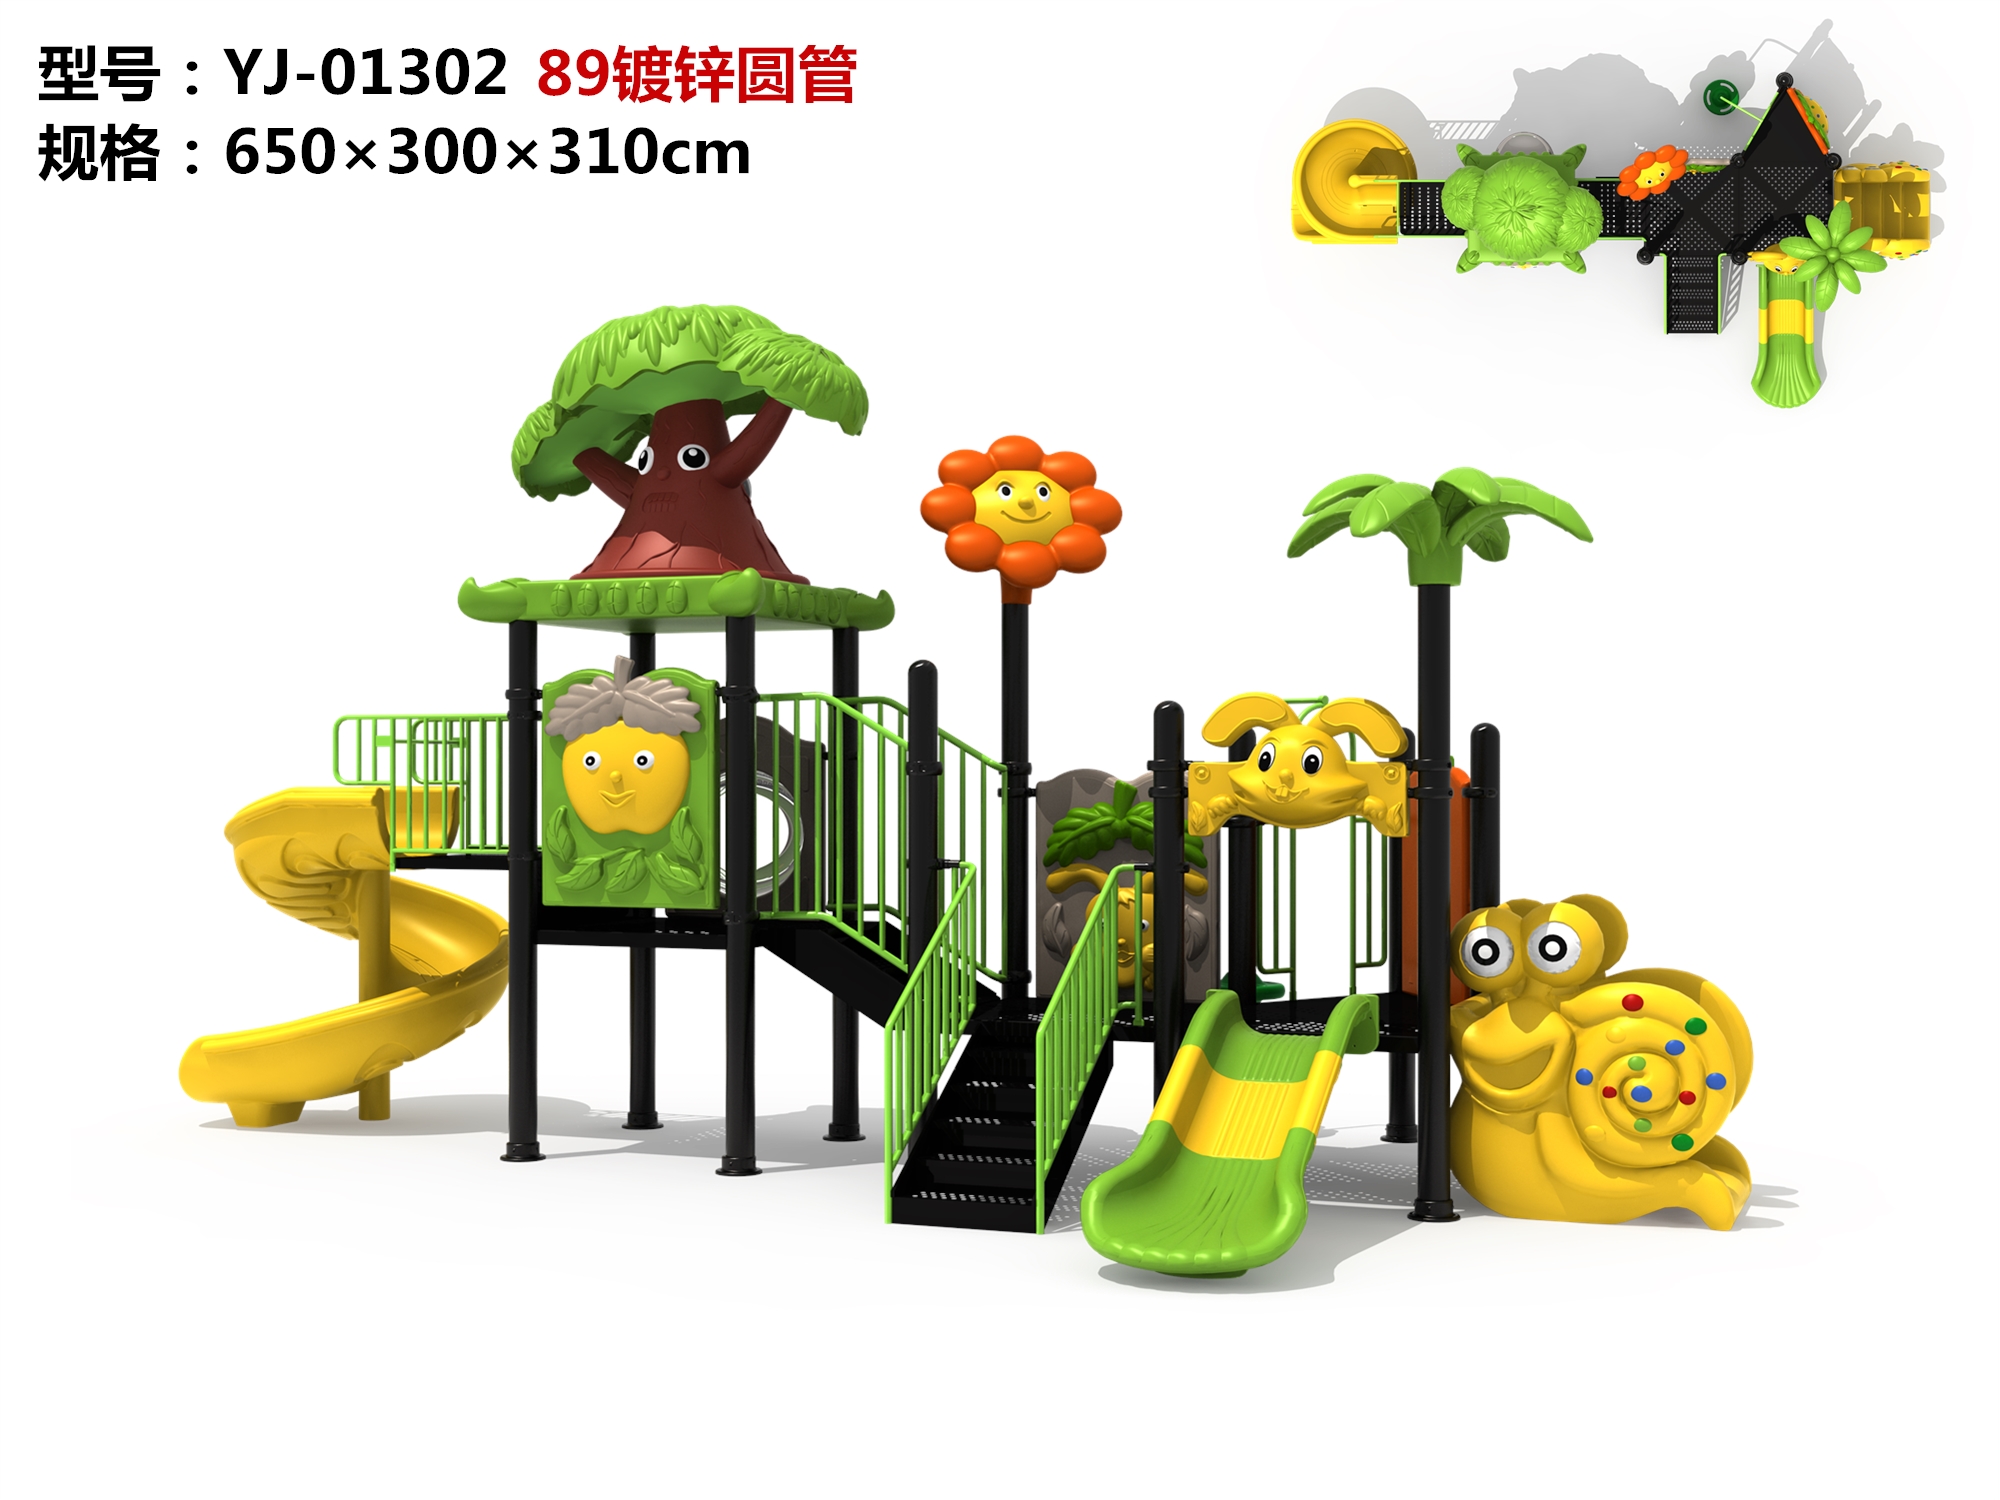 OL-MH01302Playscapes slide playground outdoor